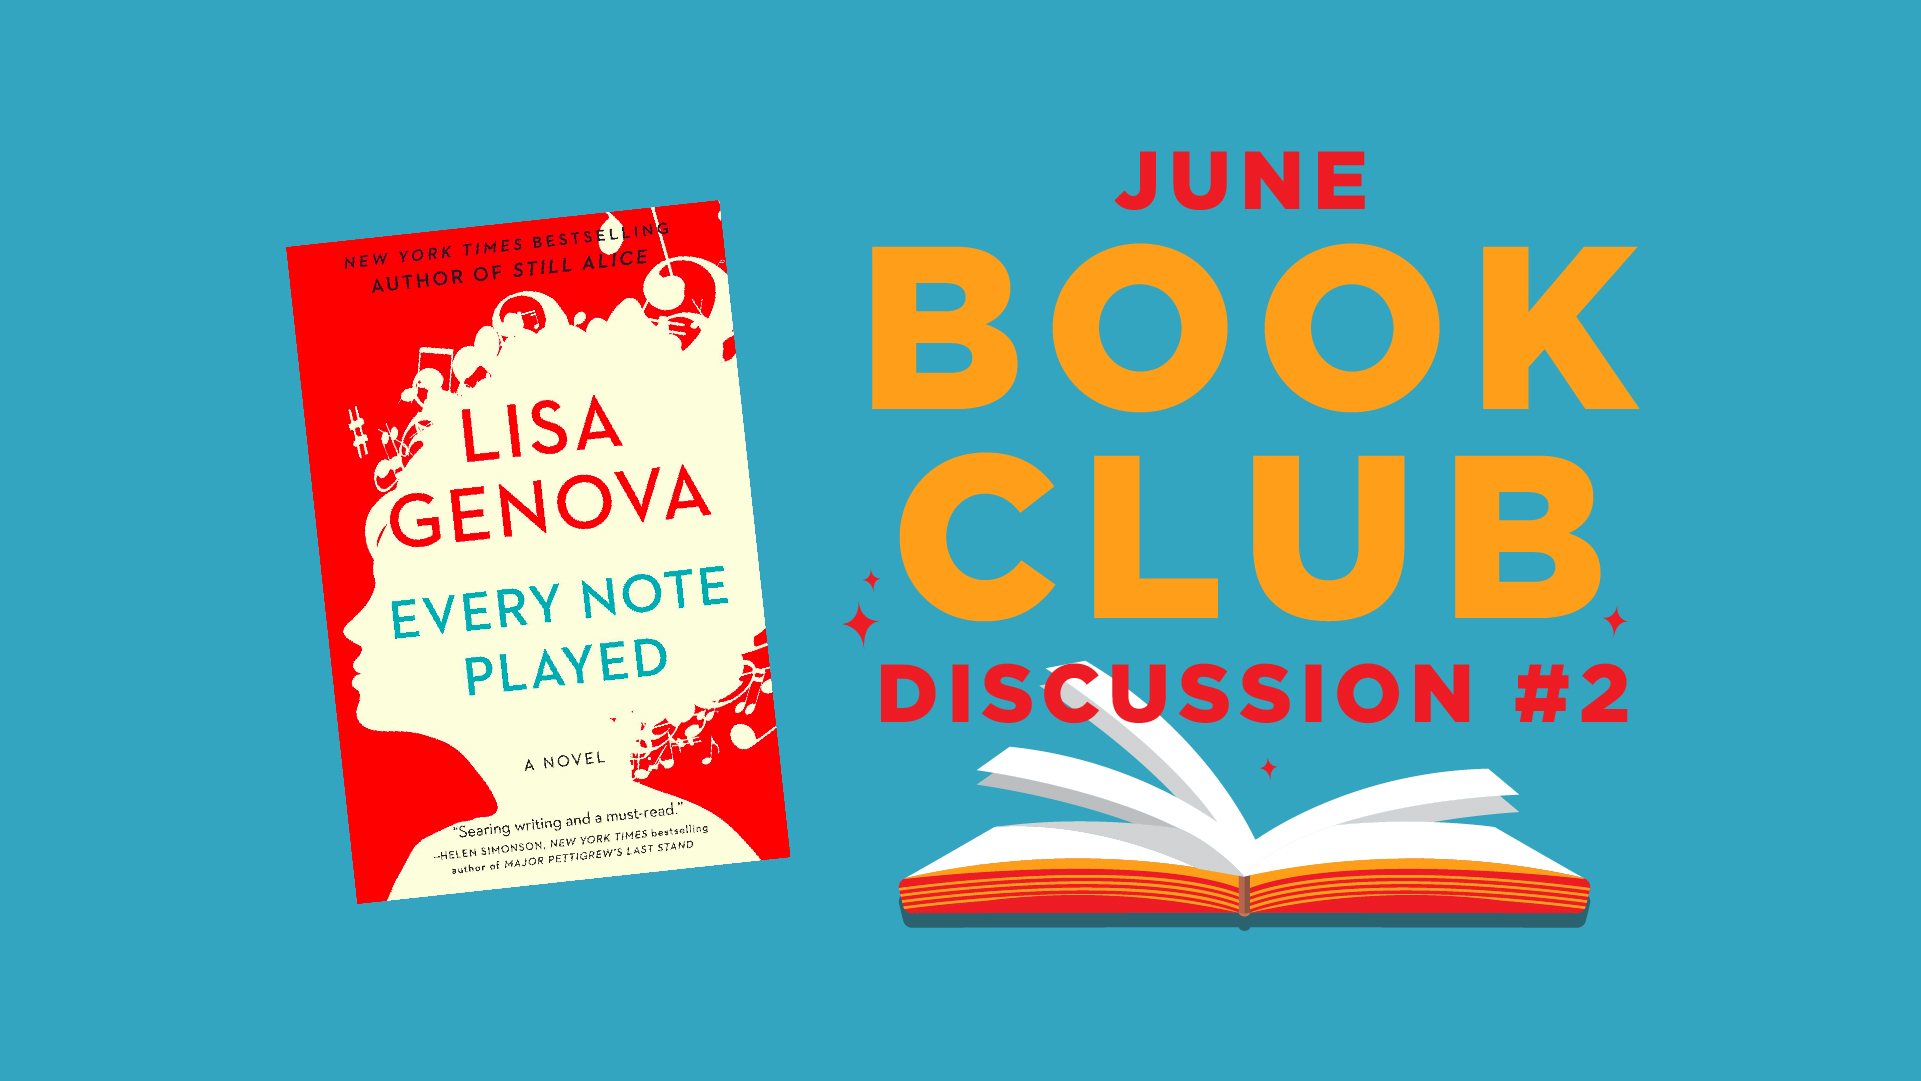 June Book Club Discussion #2 - Every Note Played by Lisa Genova